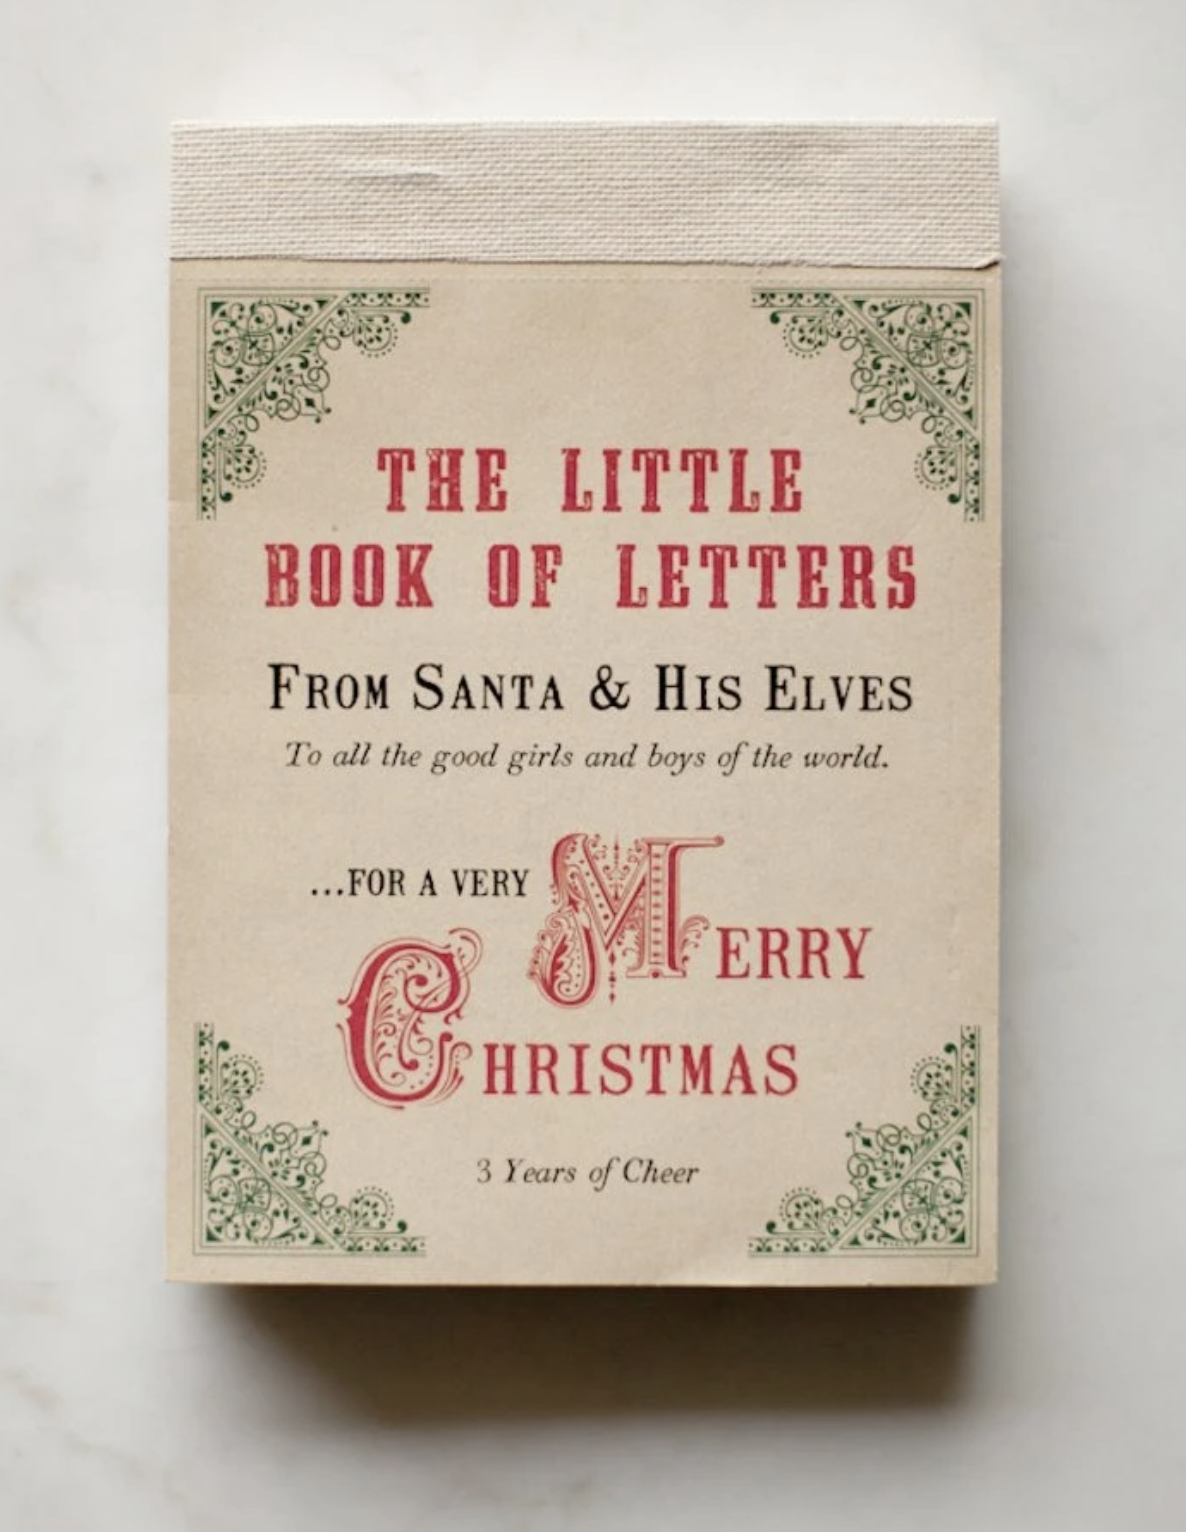 Heirloom Art Co. The Little Book of Letters from Santa